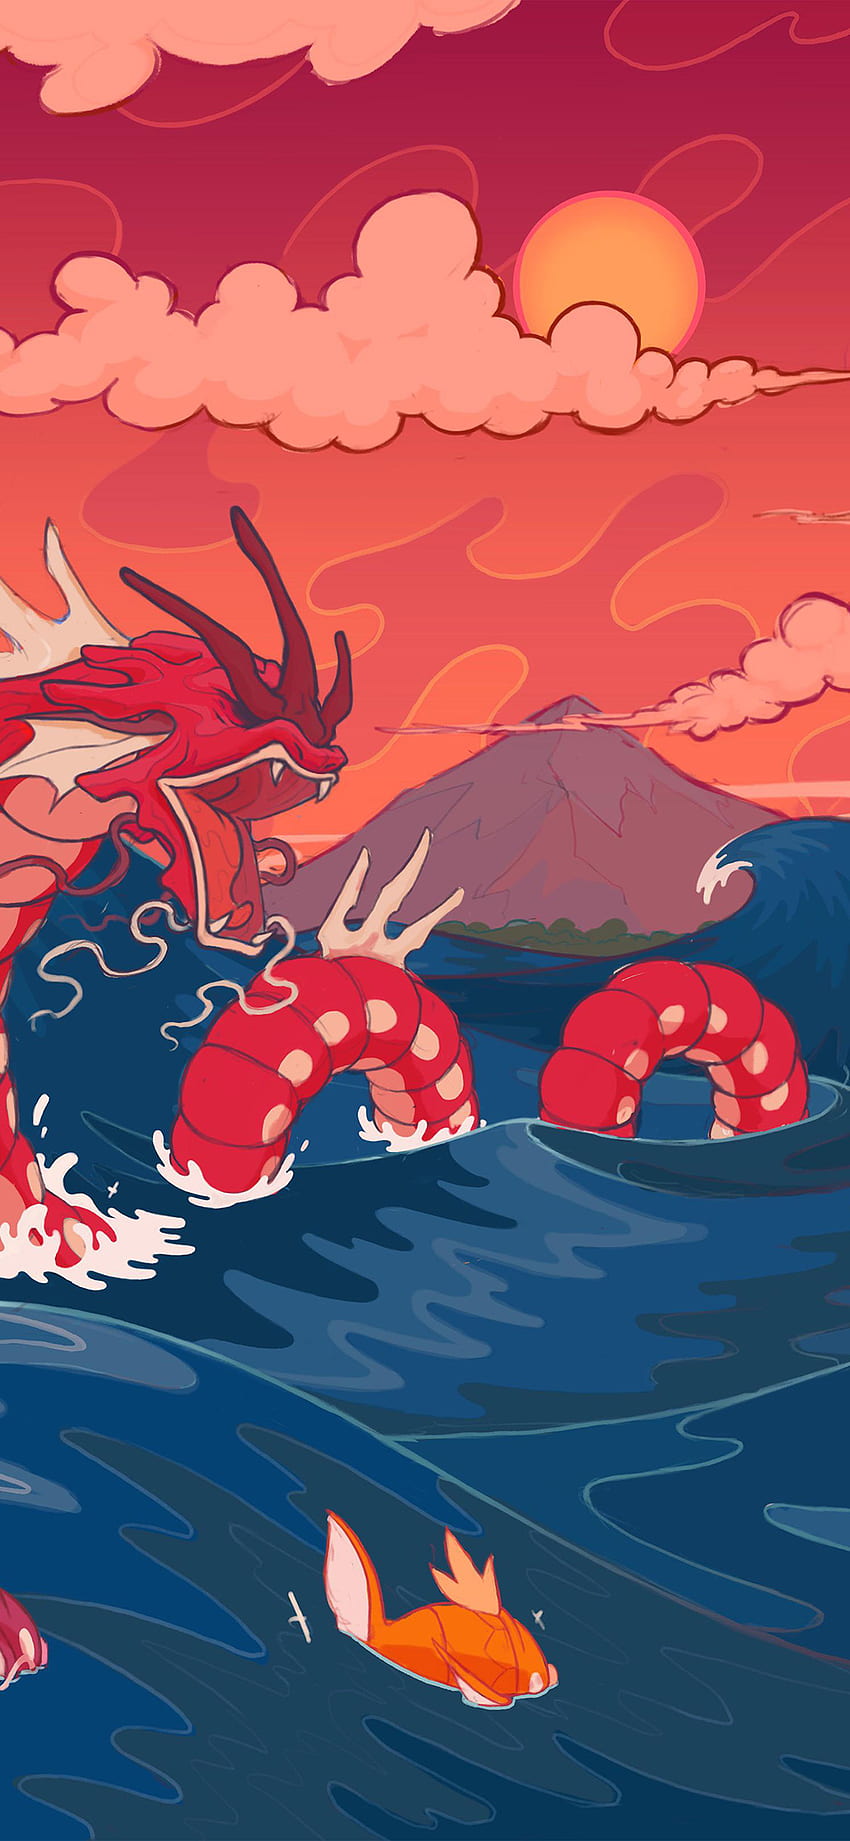 A red sea monster with red spots and red horns is in the water - Pokemon